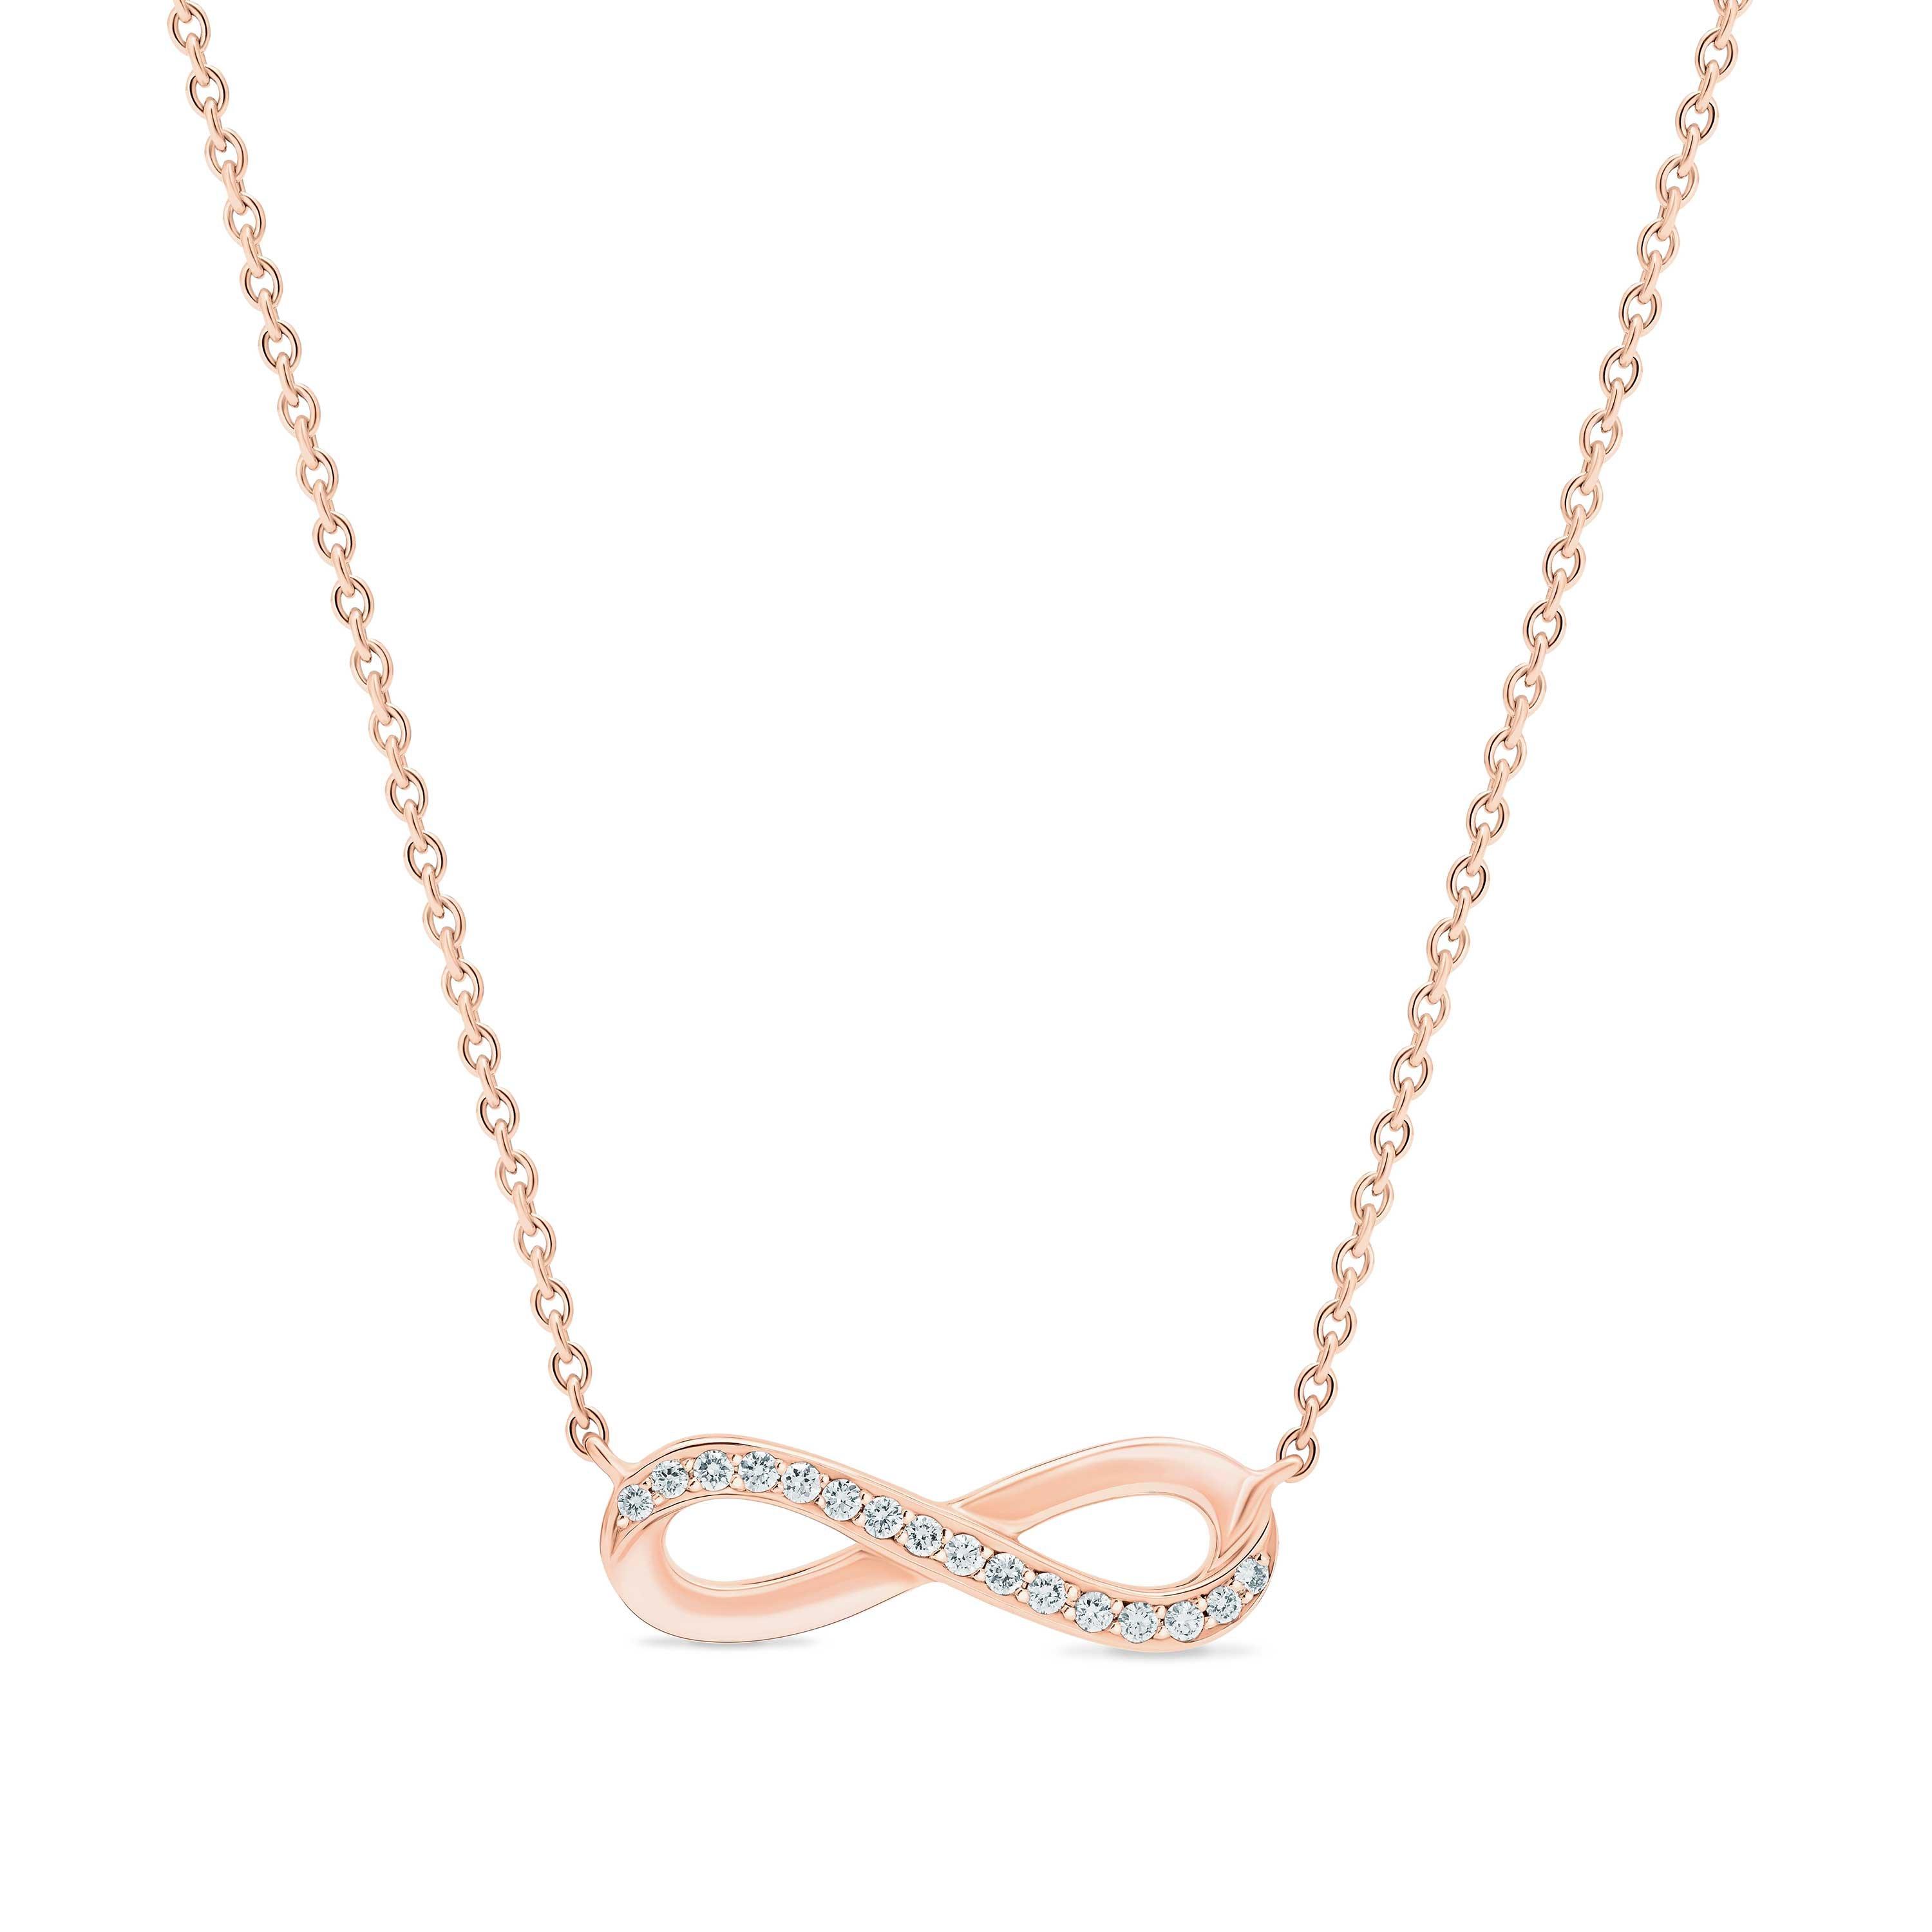 Infinity necklace in rose gold